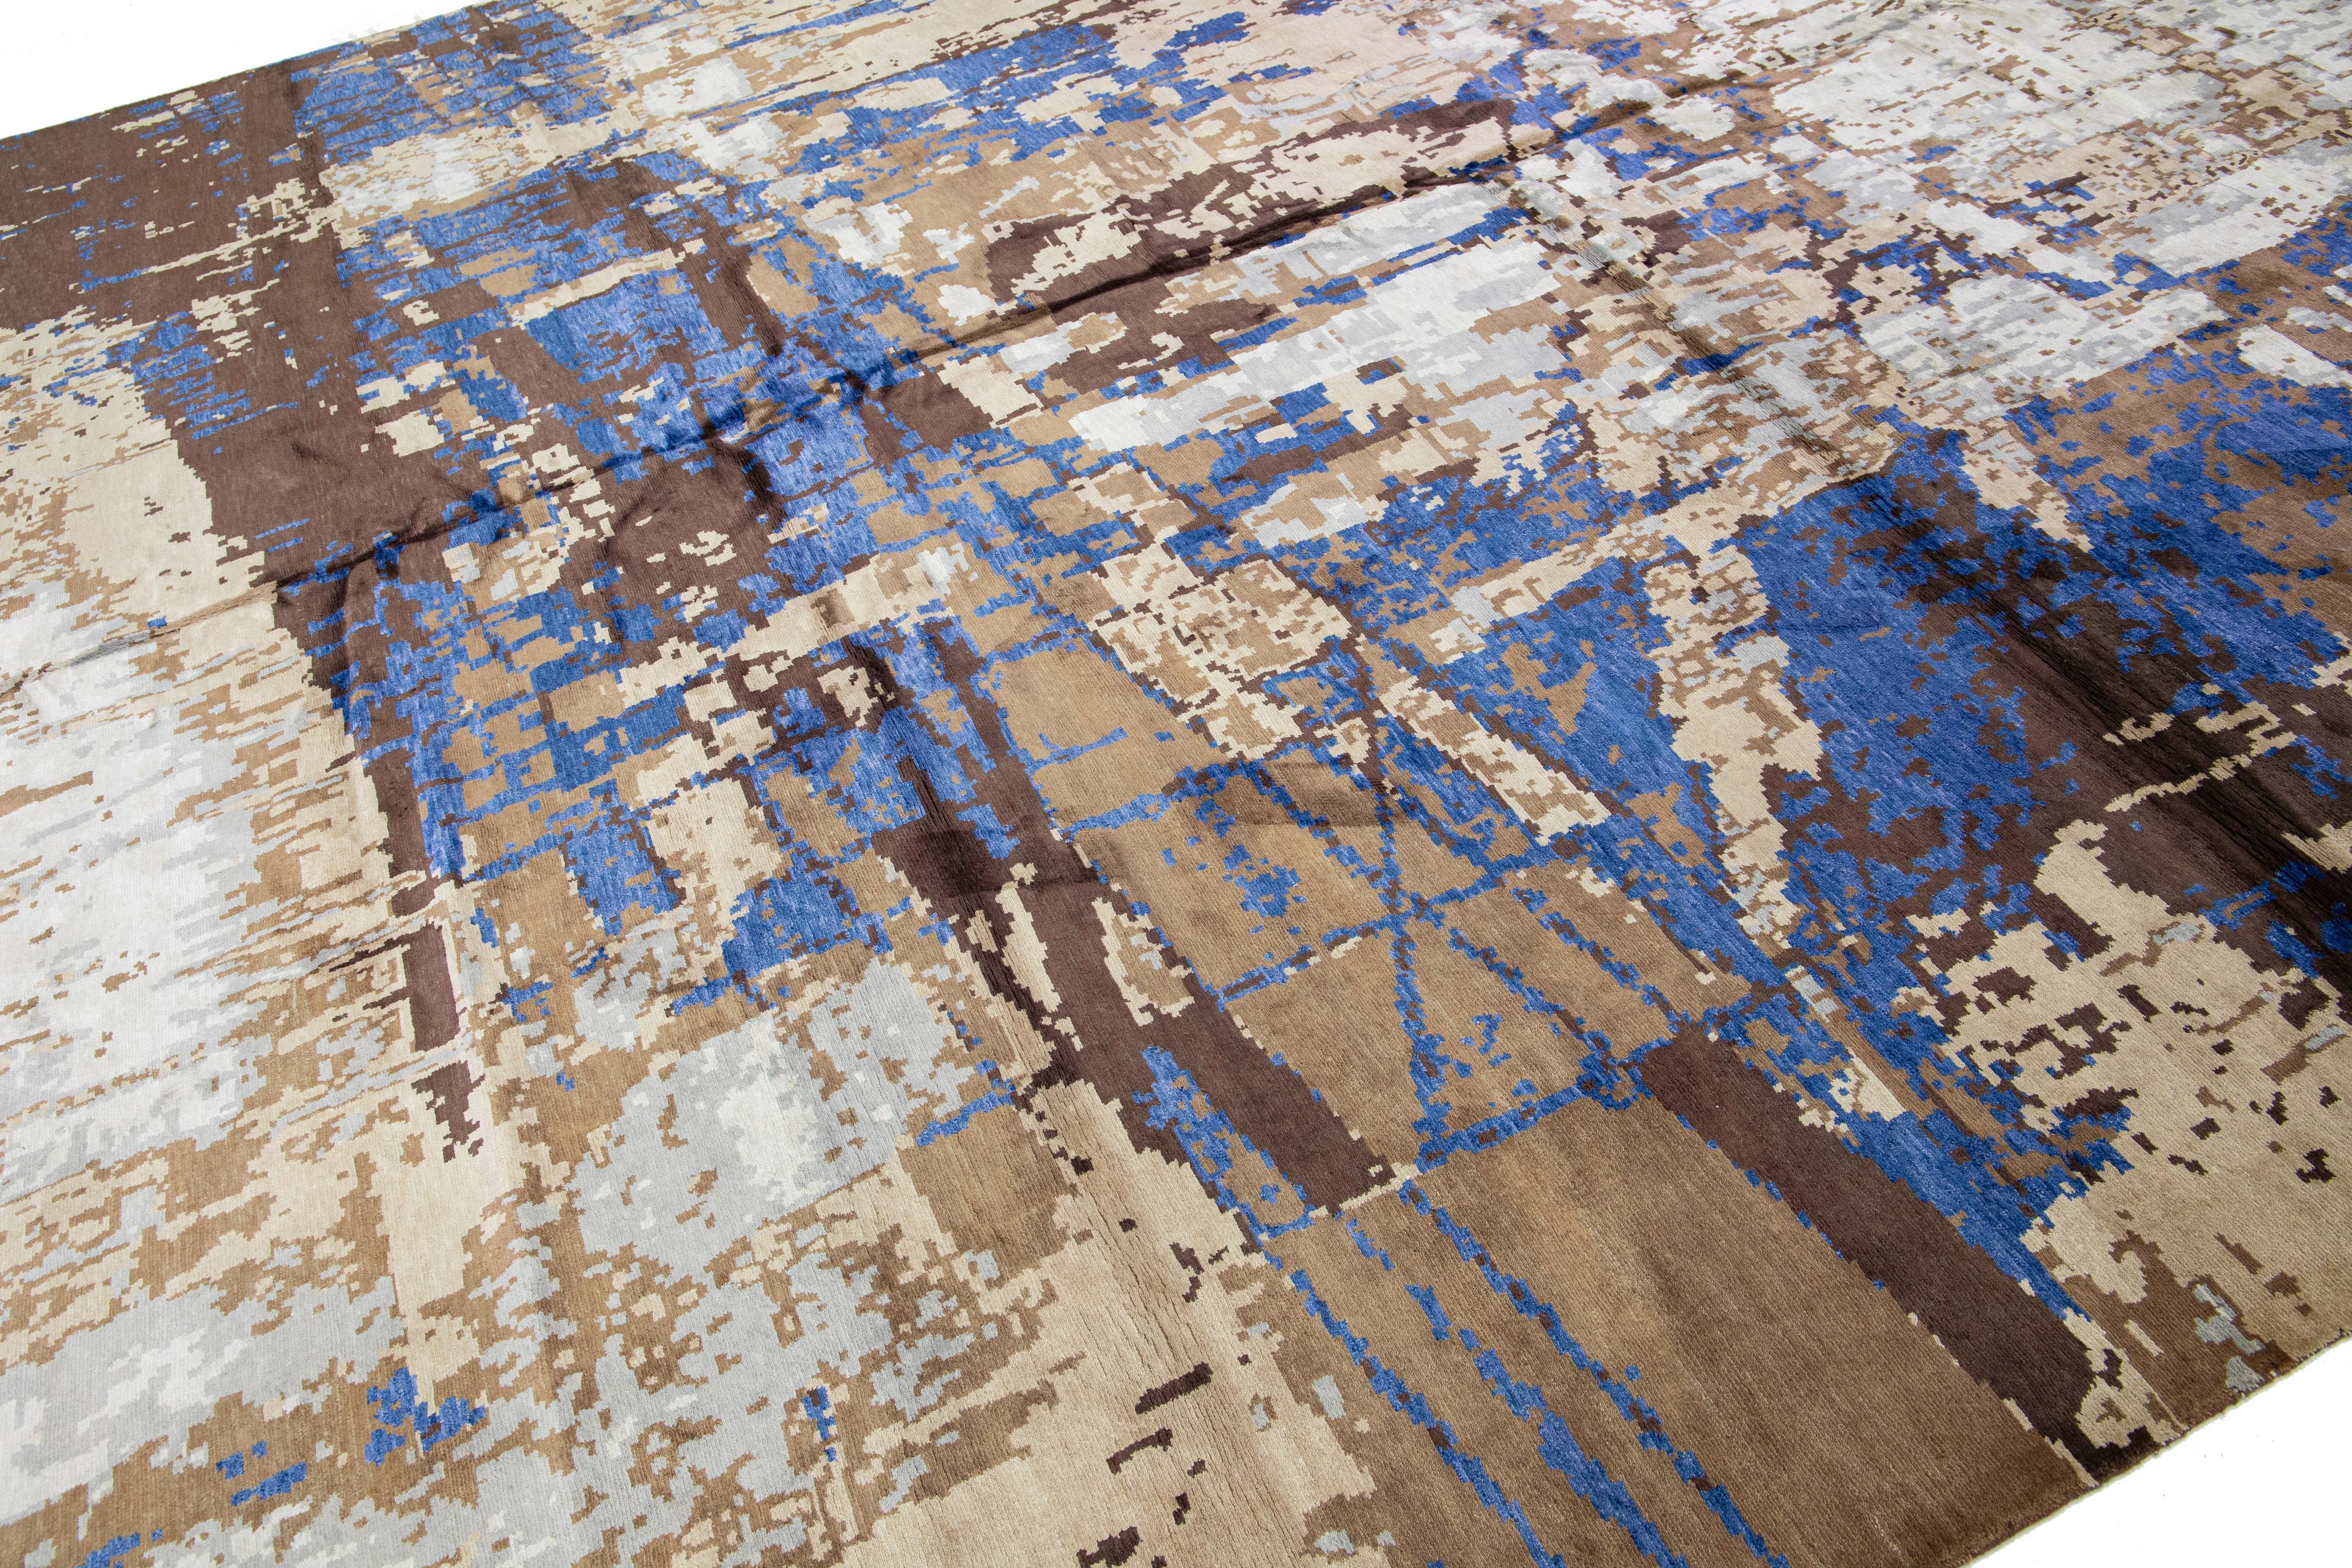 Beautiful modern hand-knotted wool and silk rug with beige, blue, and brownfields. This Modern rug has a gorgeous all-over geometric abstract design.

This rug measures 12' x 15'1